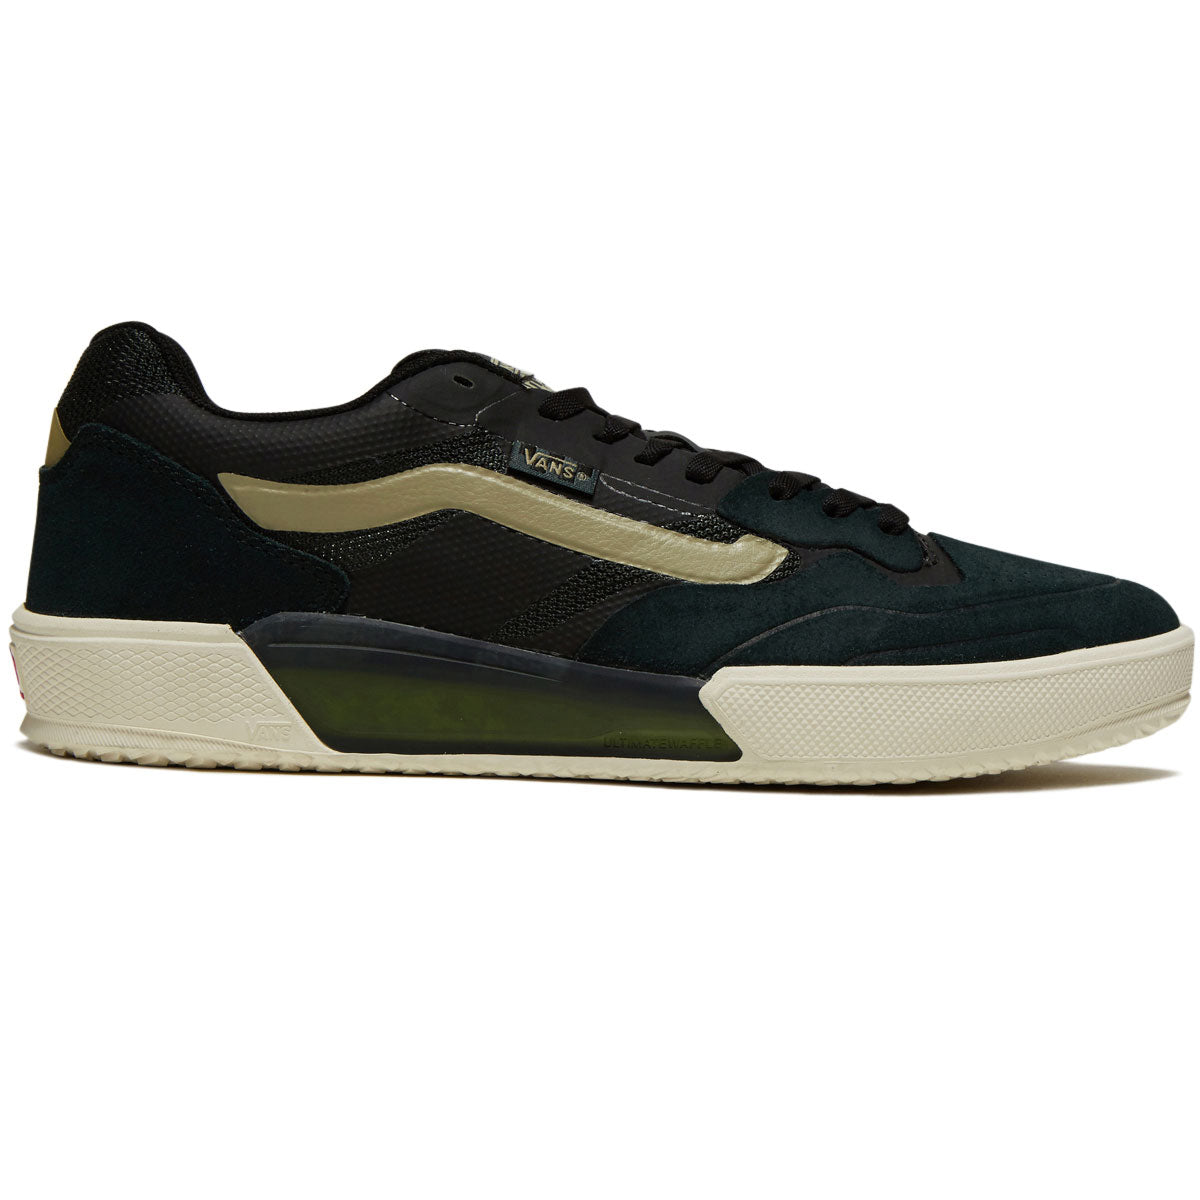 Vans AVE 2.0 Shoes - AVE Bench Green image 1